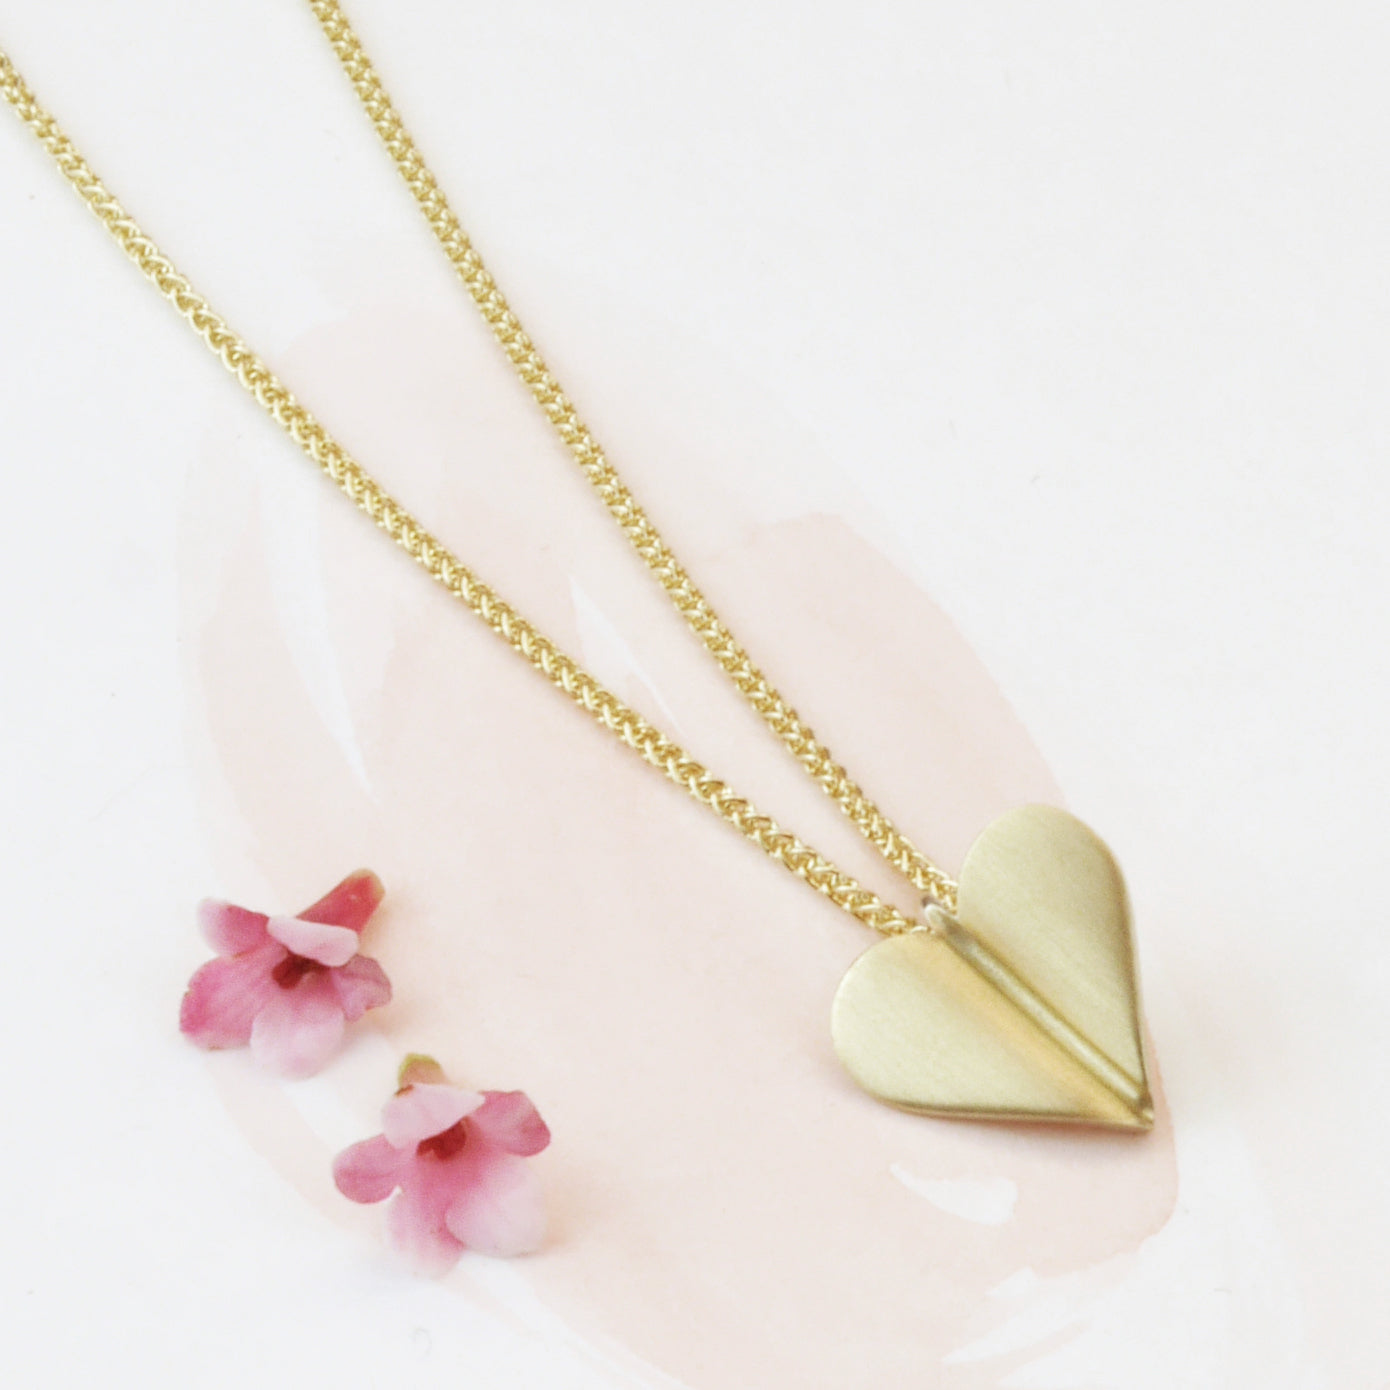 9ct Gold Heart Necklace - Geometric Pendant - Louy Magroos